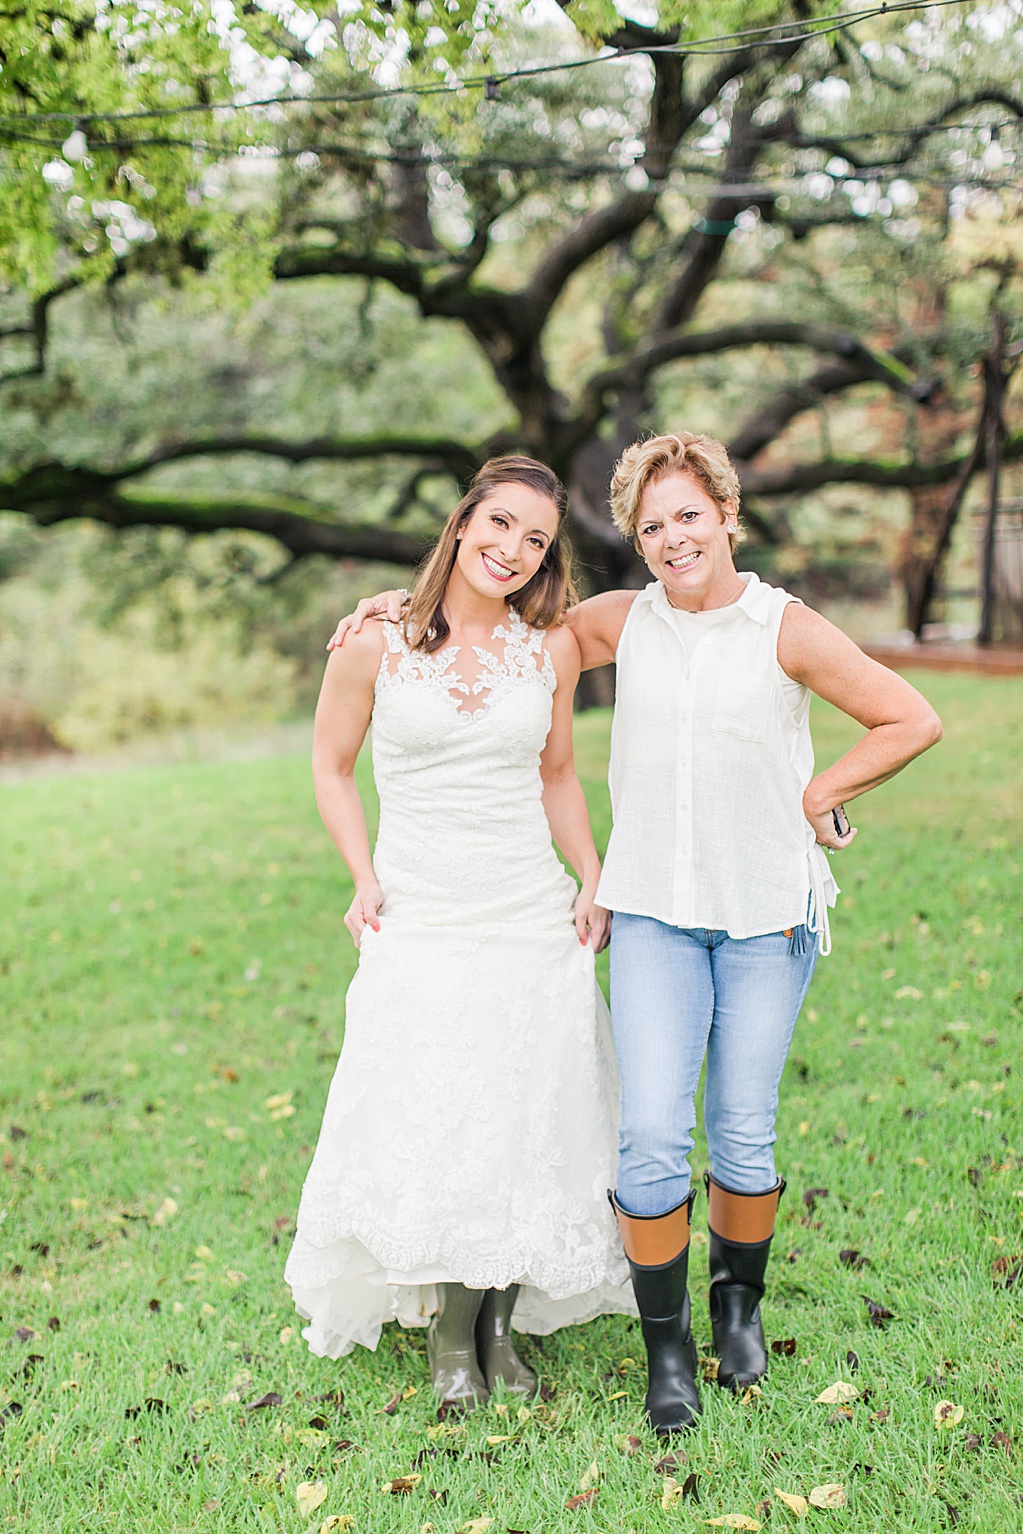 Rainy day bridal session at sisterdale dancehall in boerne texas 0012